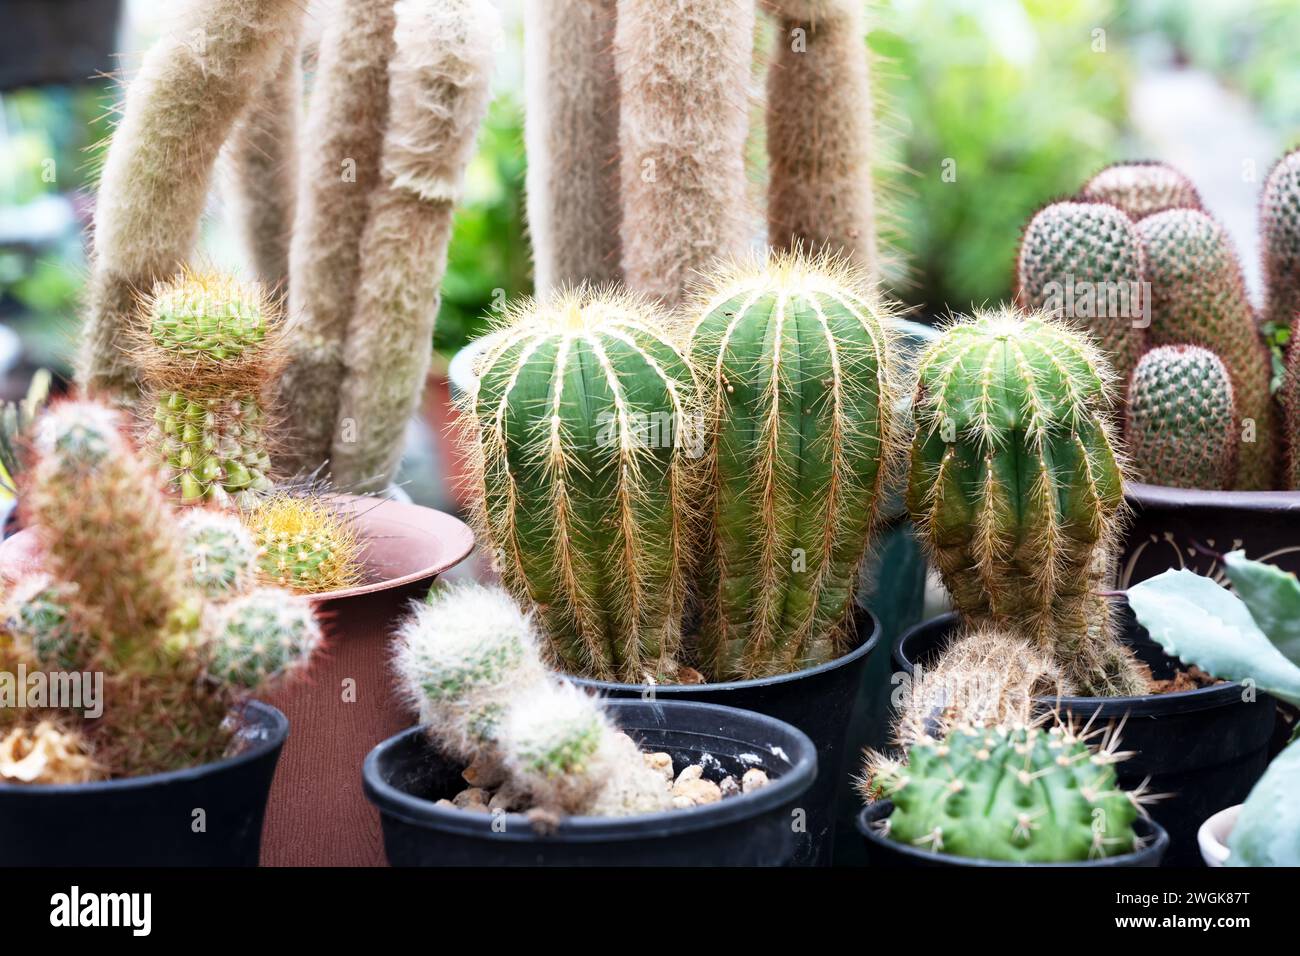 Close up of Parodia magnifica cactus and other types of cactus in a pots Stock Photo